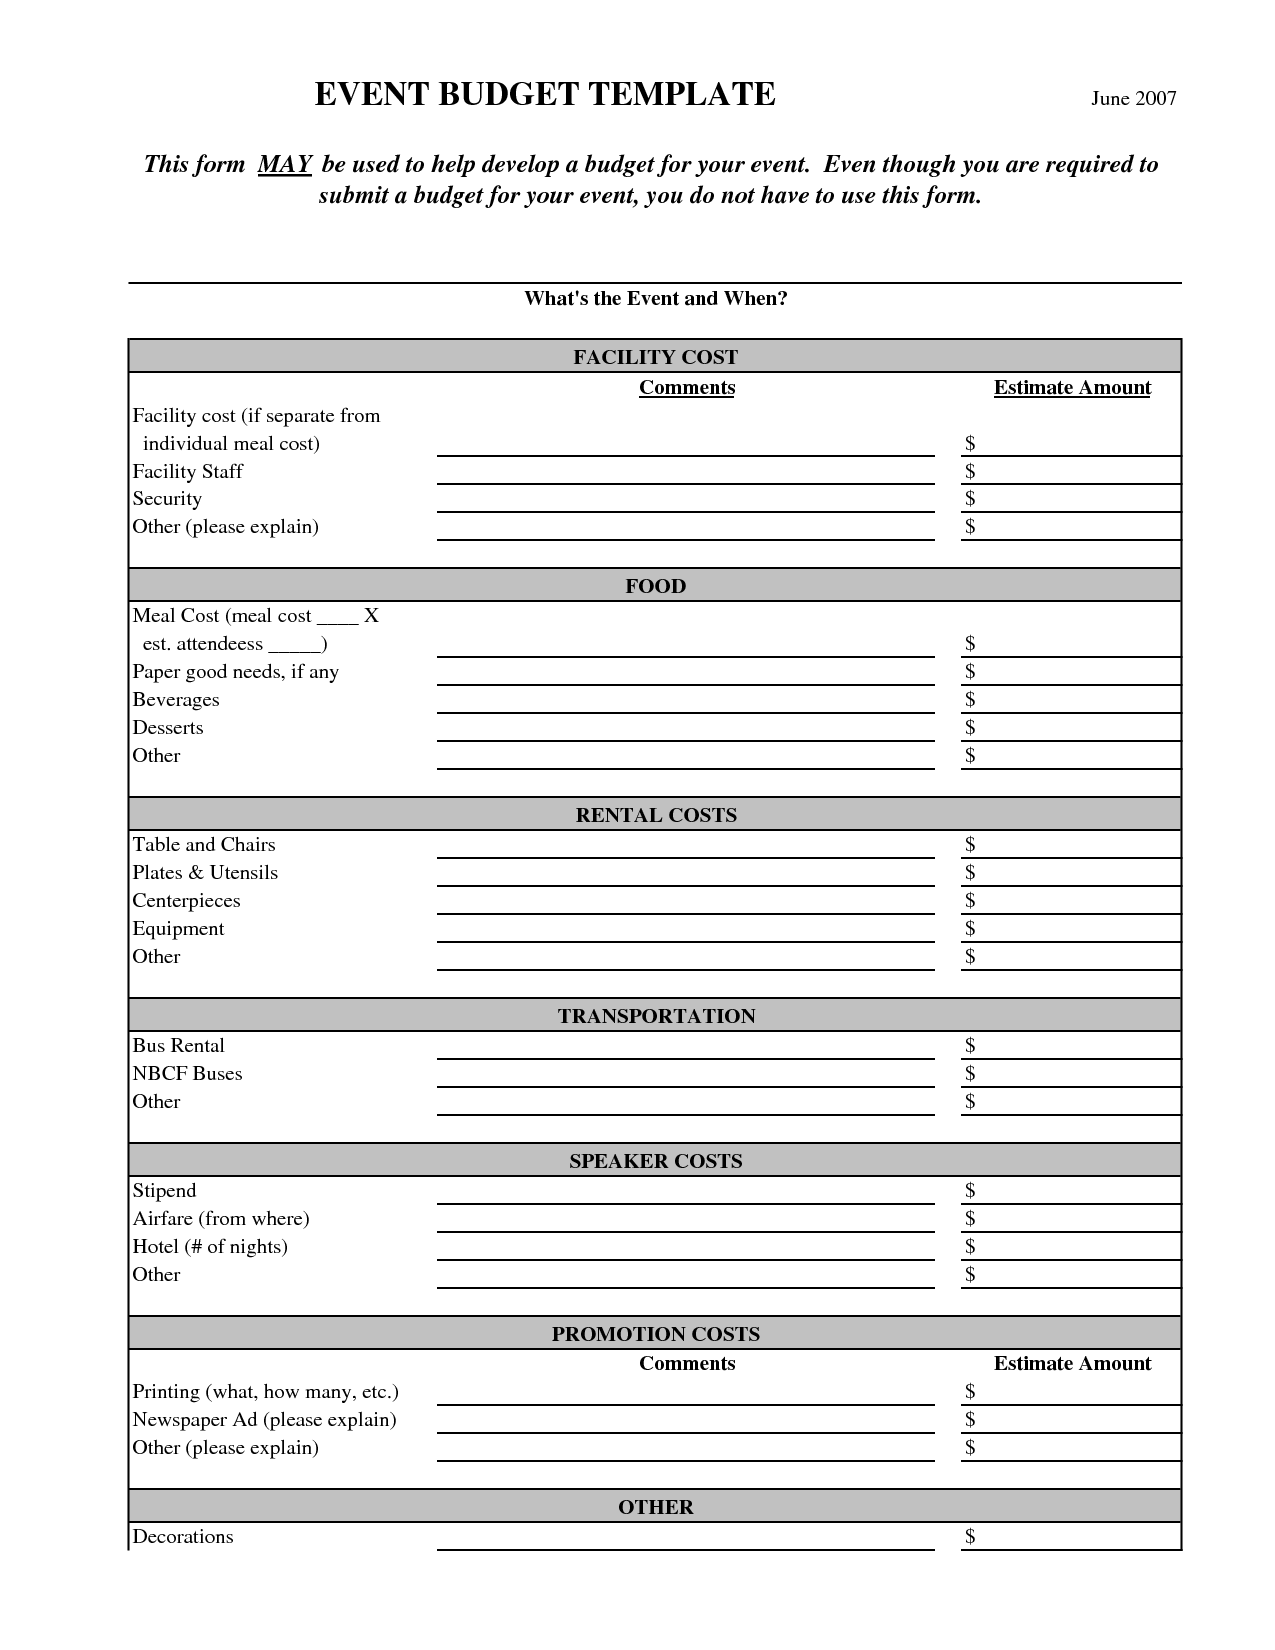 template : Party Planner Template  Event Budget Template June  With Regard To Facilities Management Budget Template Inside Facilities Management Budget Template